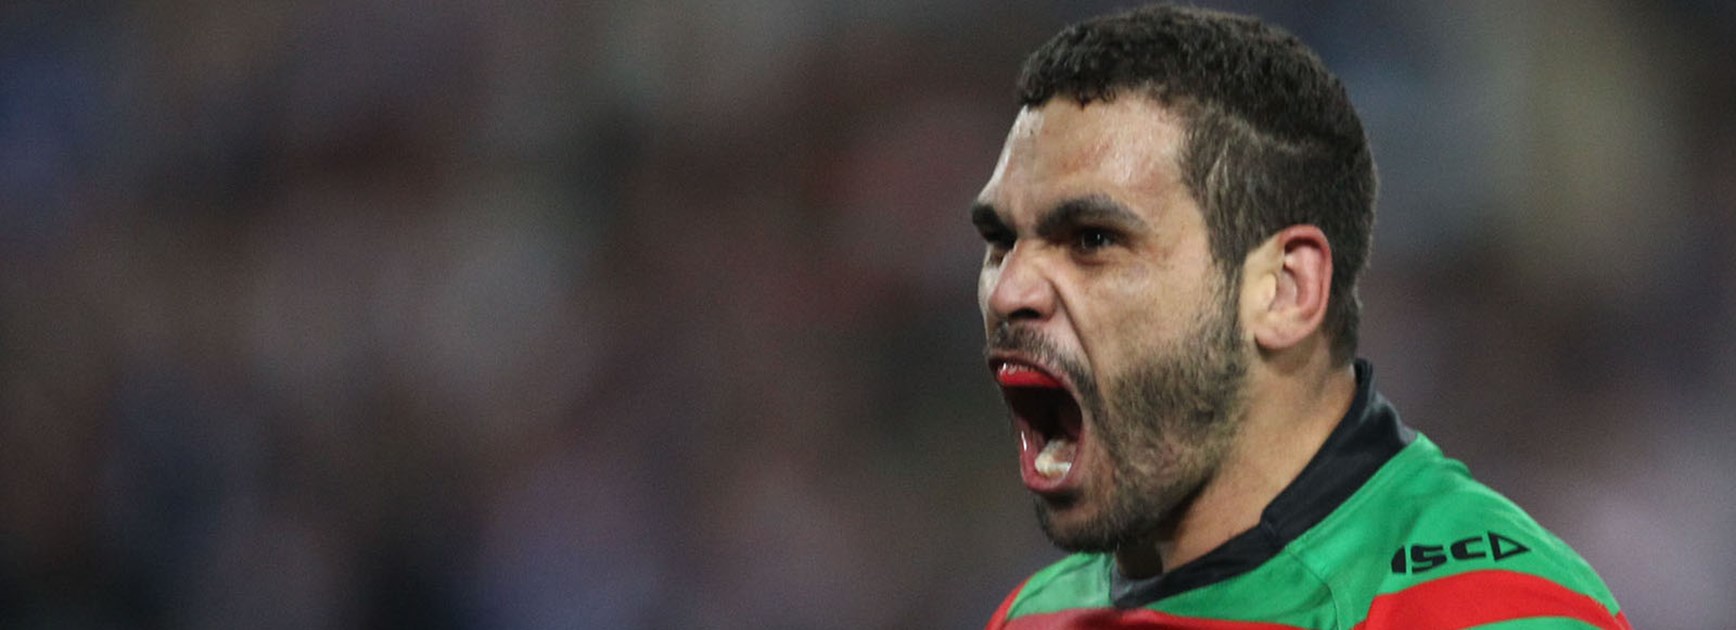 Greg Inglis celebrates as South Sydney charged towards their first Premiership in 43 years.